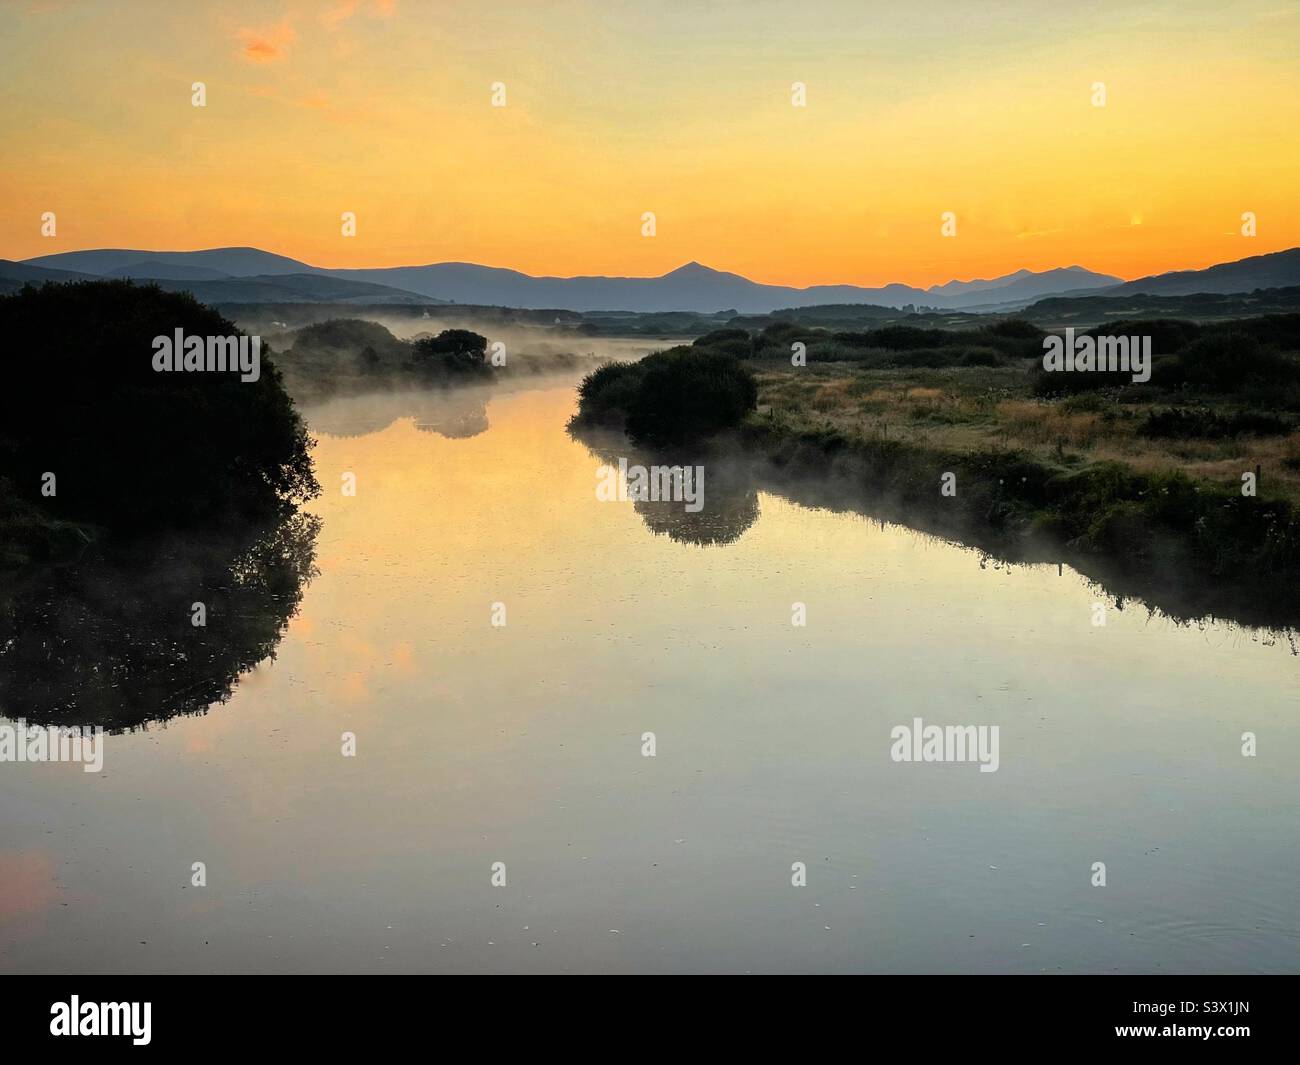 Looking inland along the River Inny at dawn towards Macgillycuddy’s Reeks, County Kerry, Ireland, August. Stock Photo